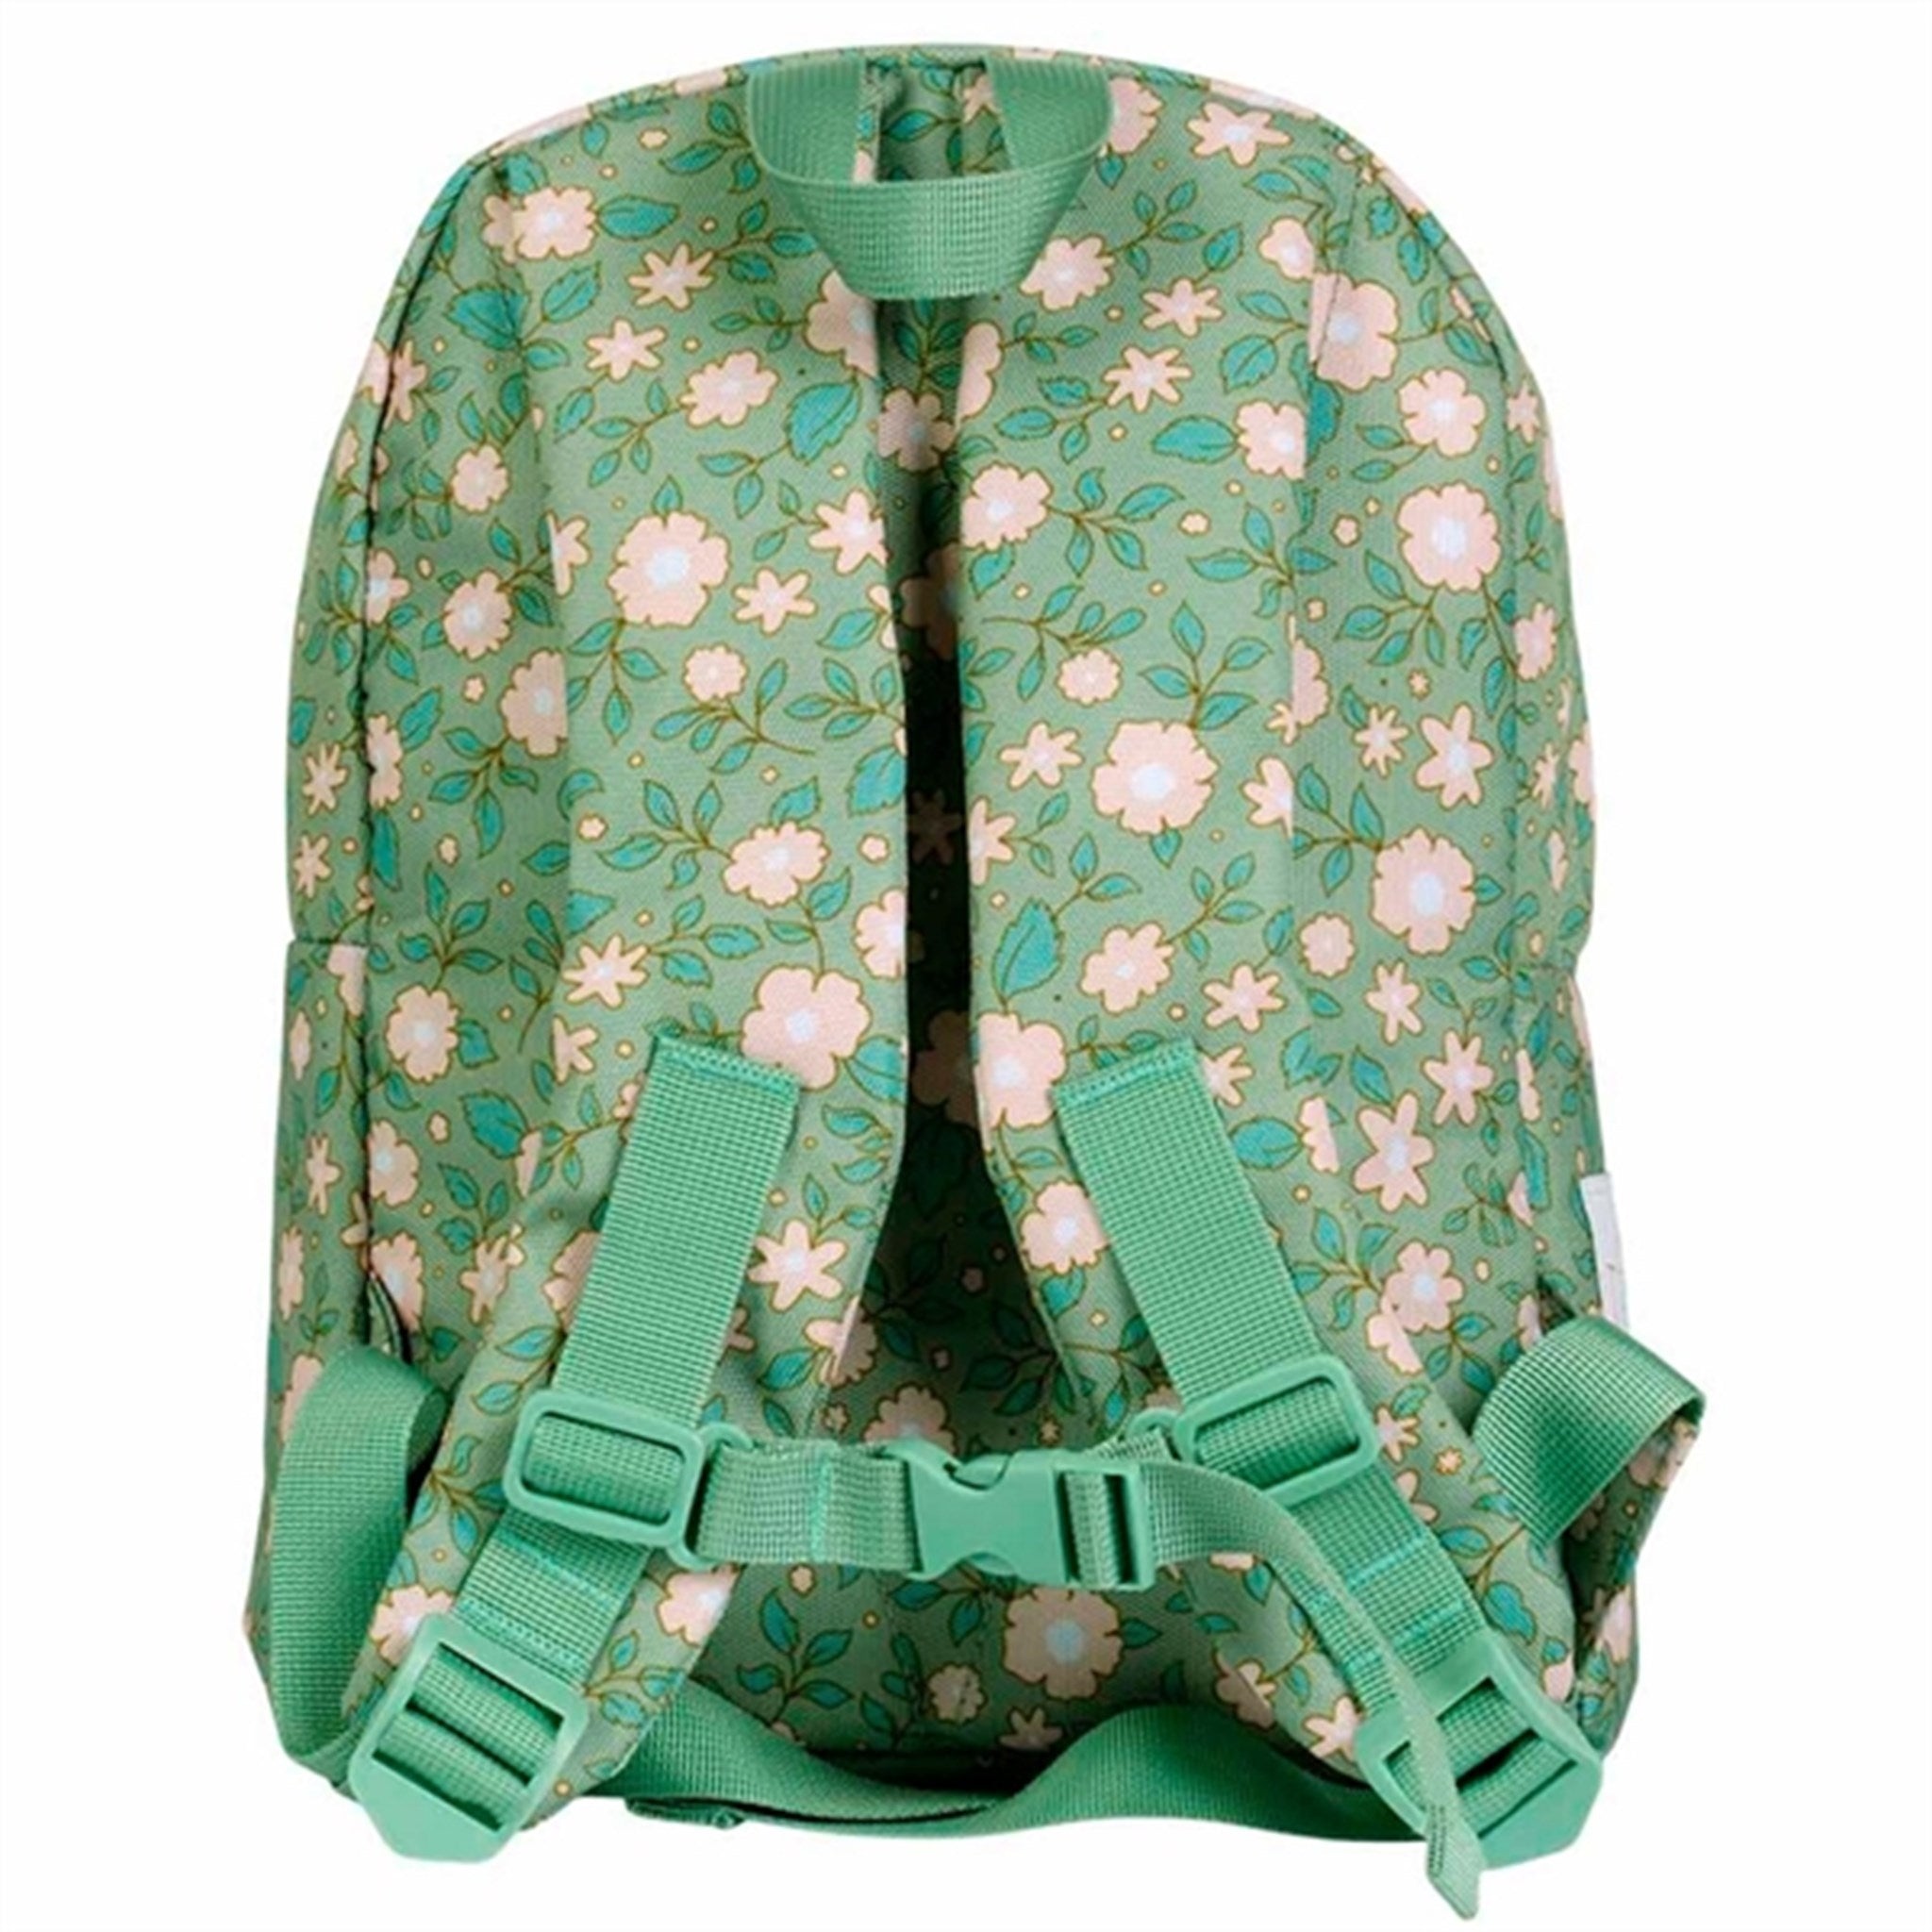 A Little Lovely Company Backpack Small Blossom Sage 3